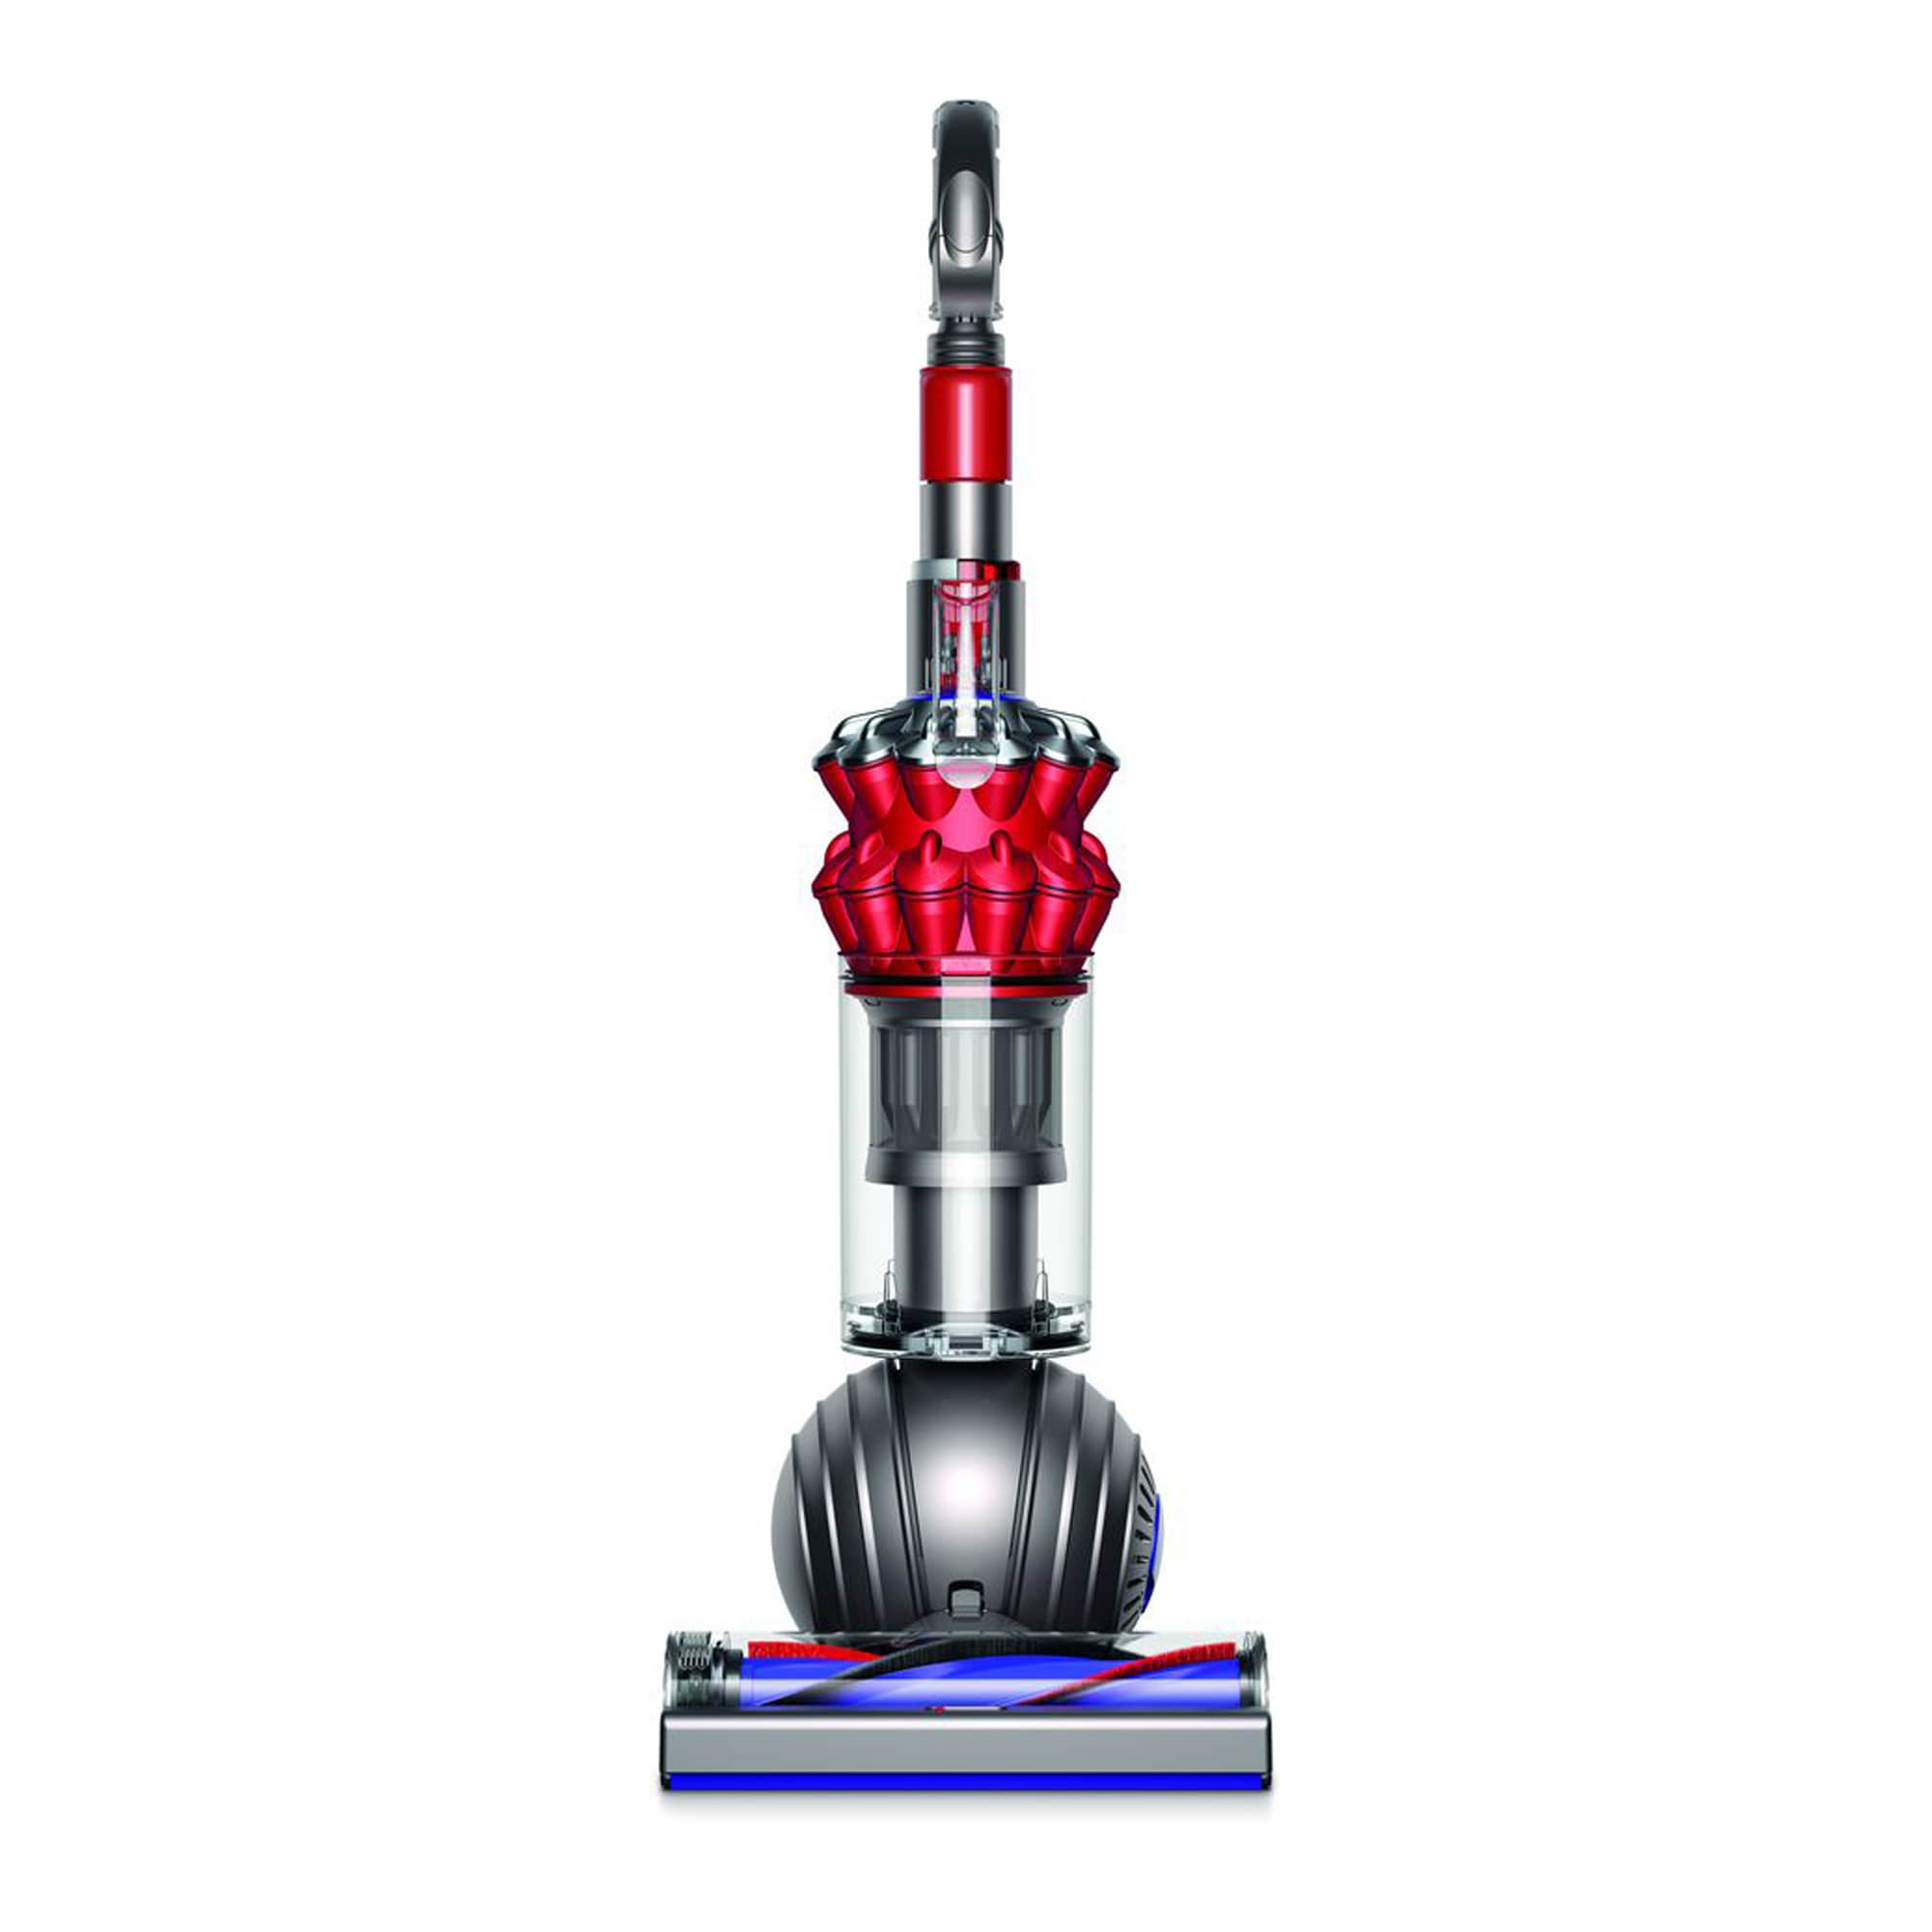 Dyson Multi Floor Corded Bagless Pet Vacuum with HEPA Filter Lowes.com